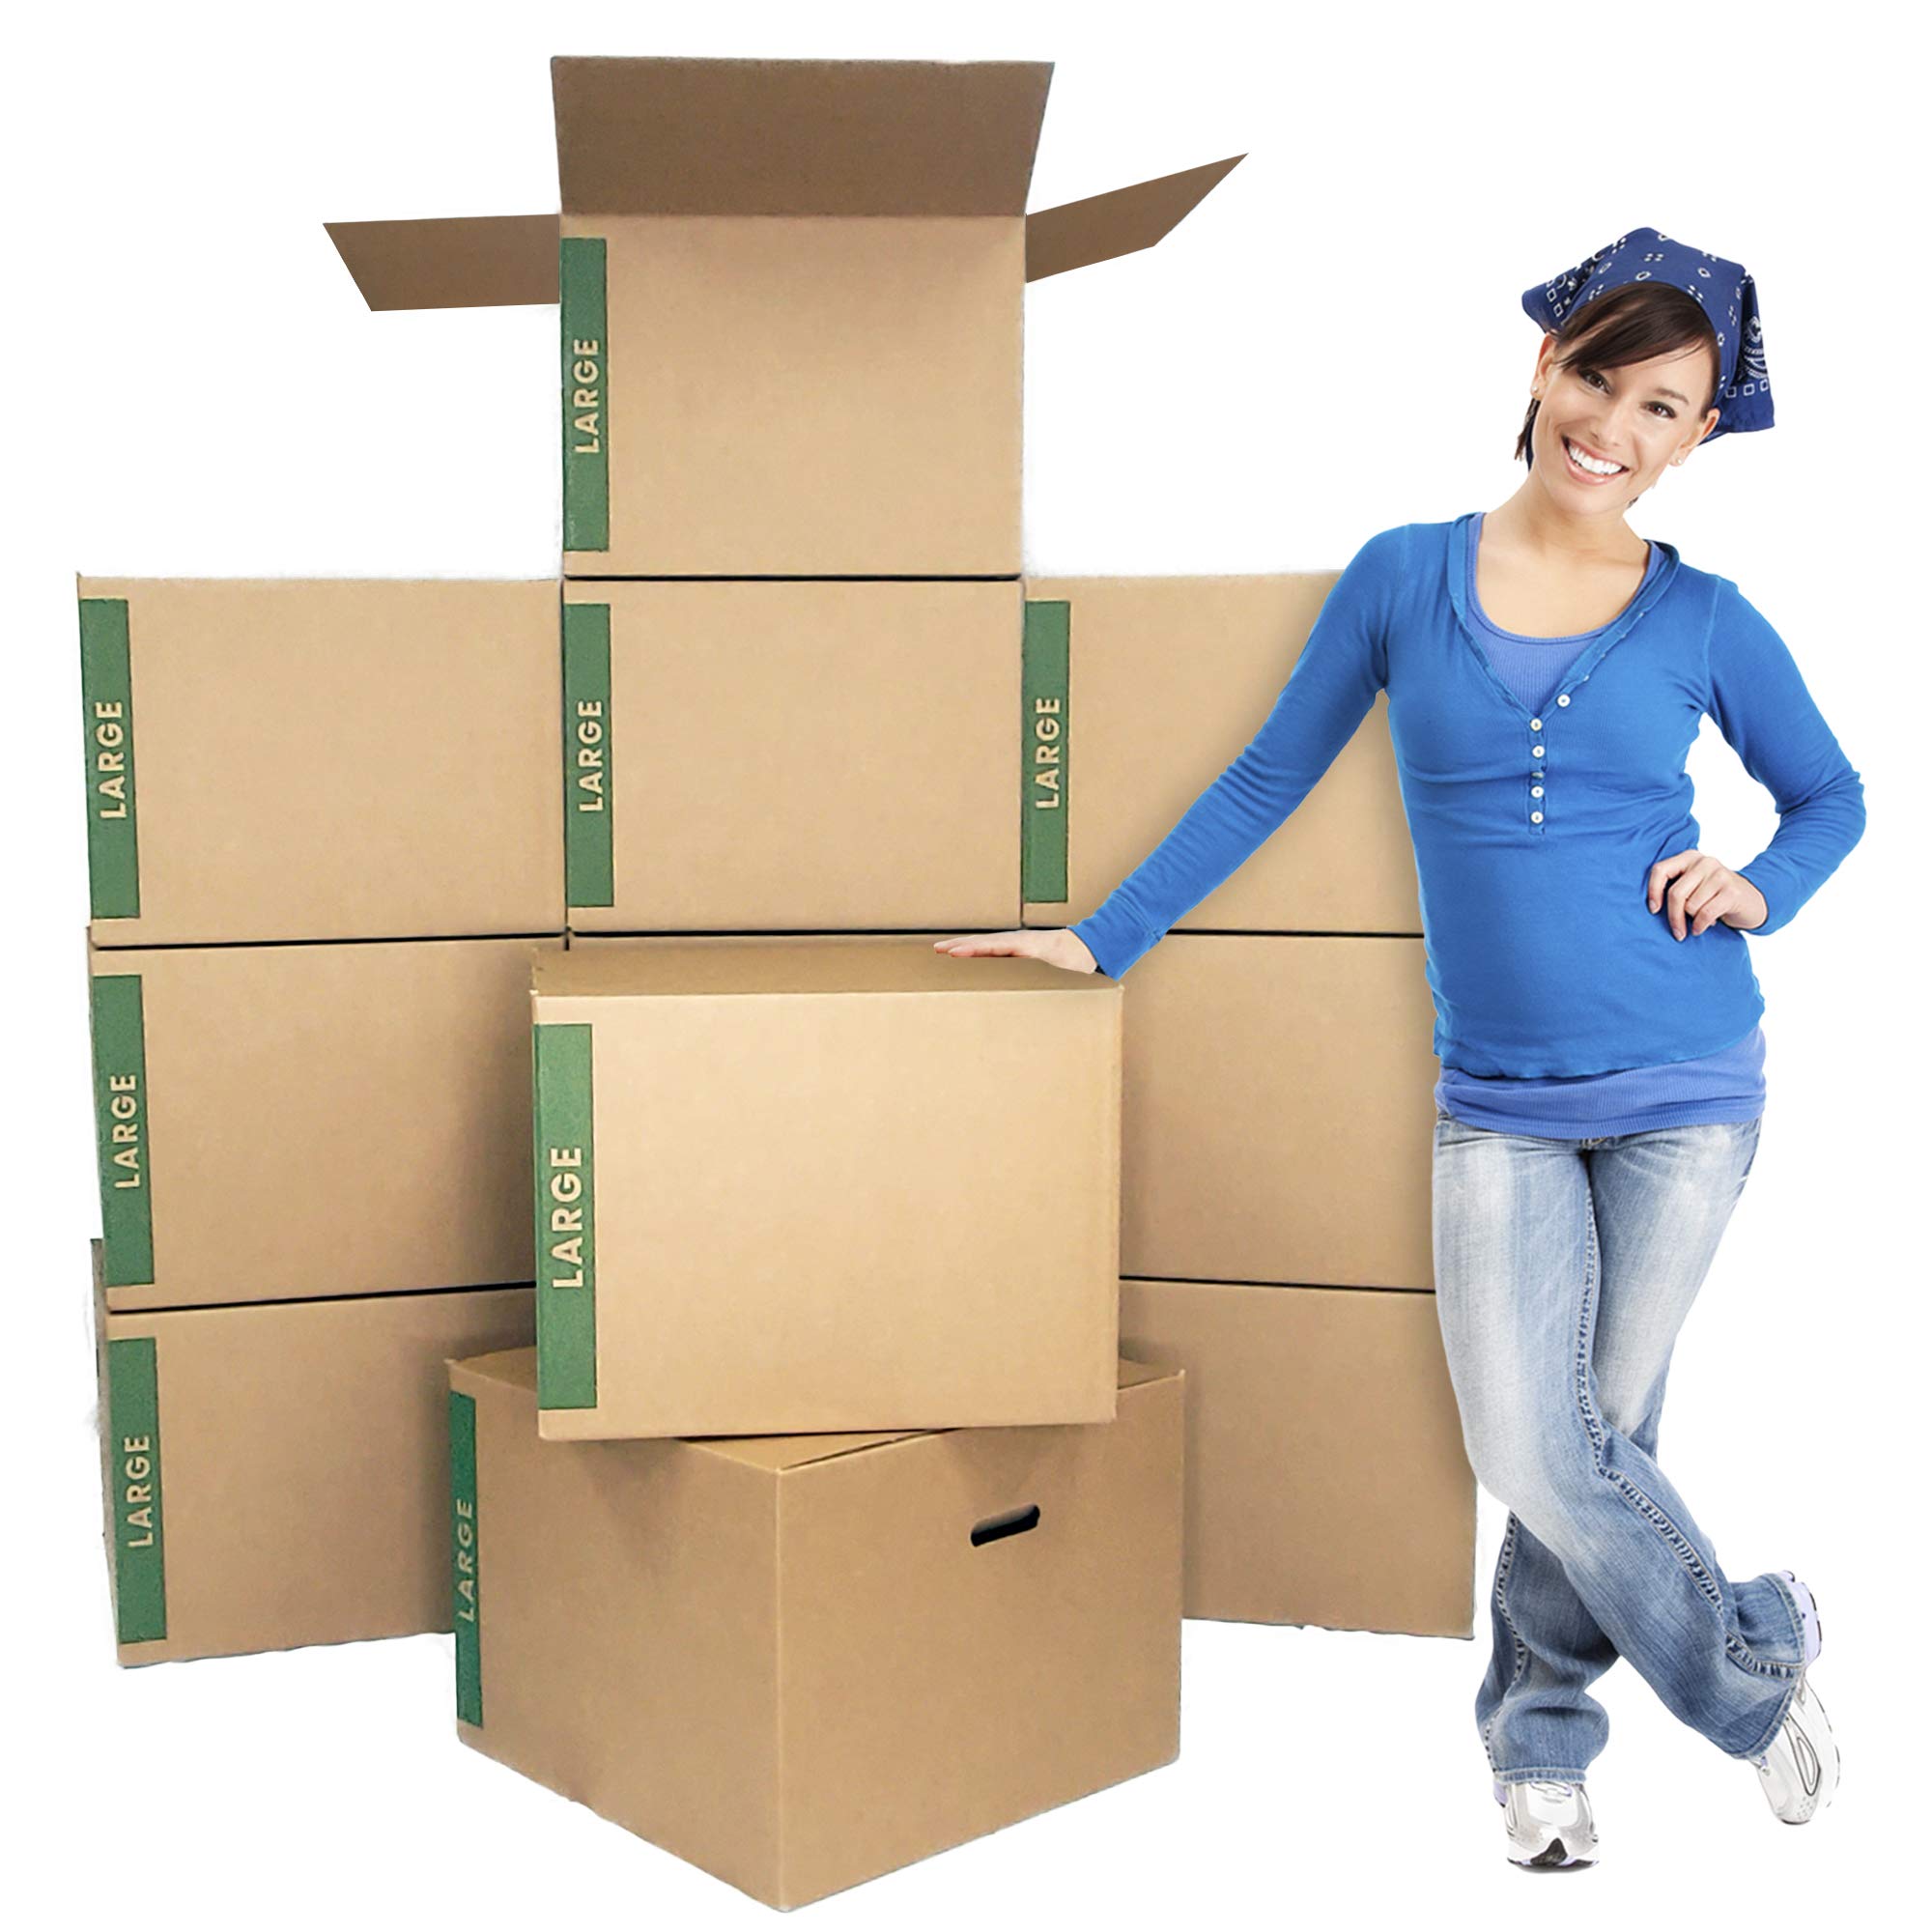 where to get moving boxes cheap